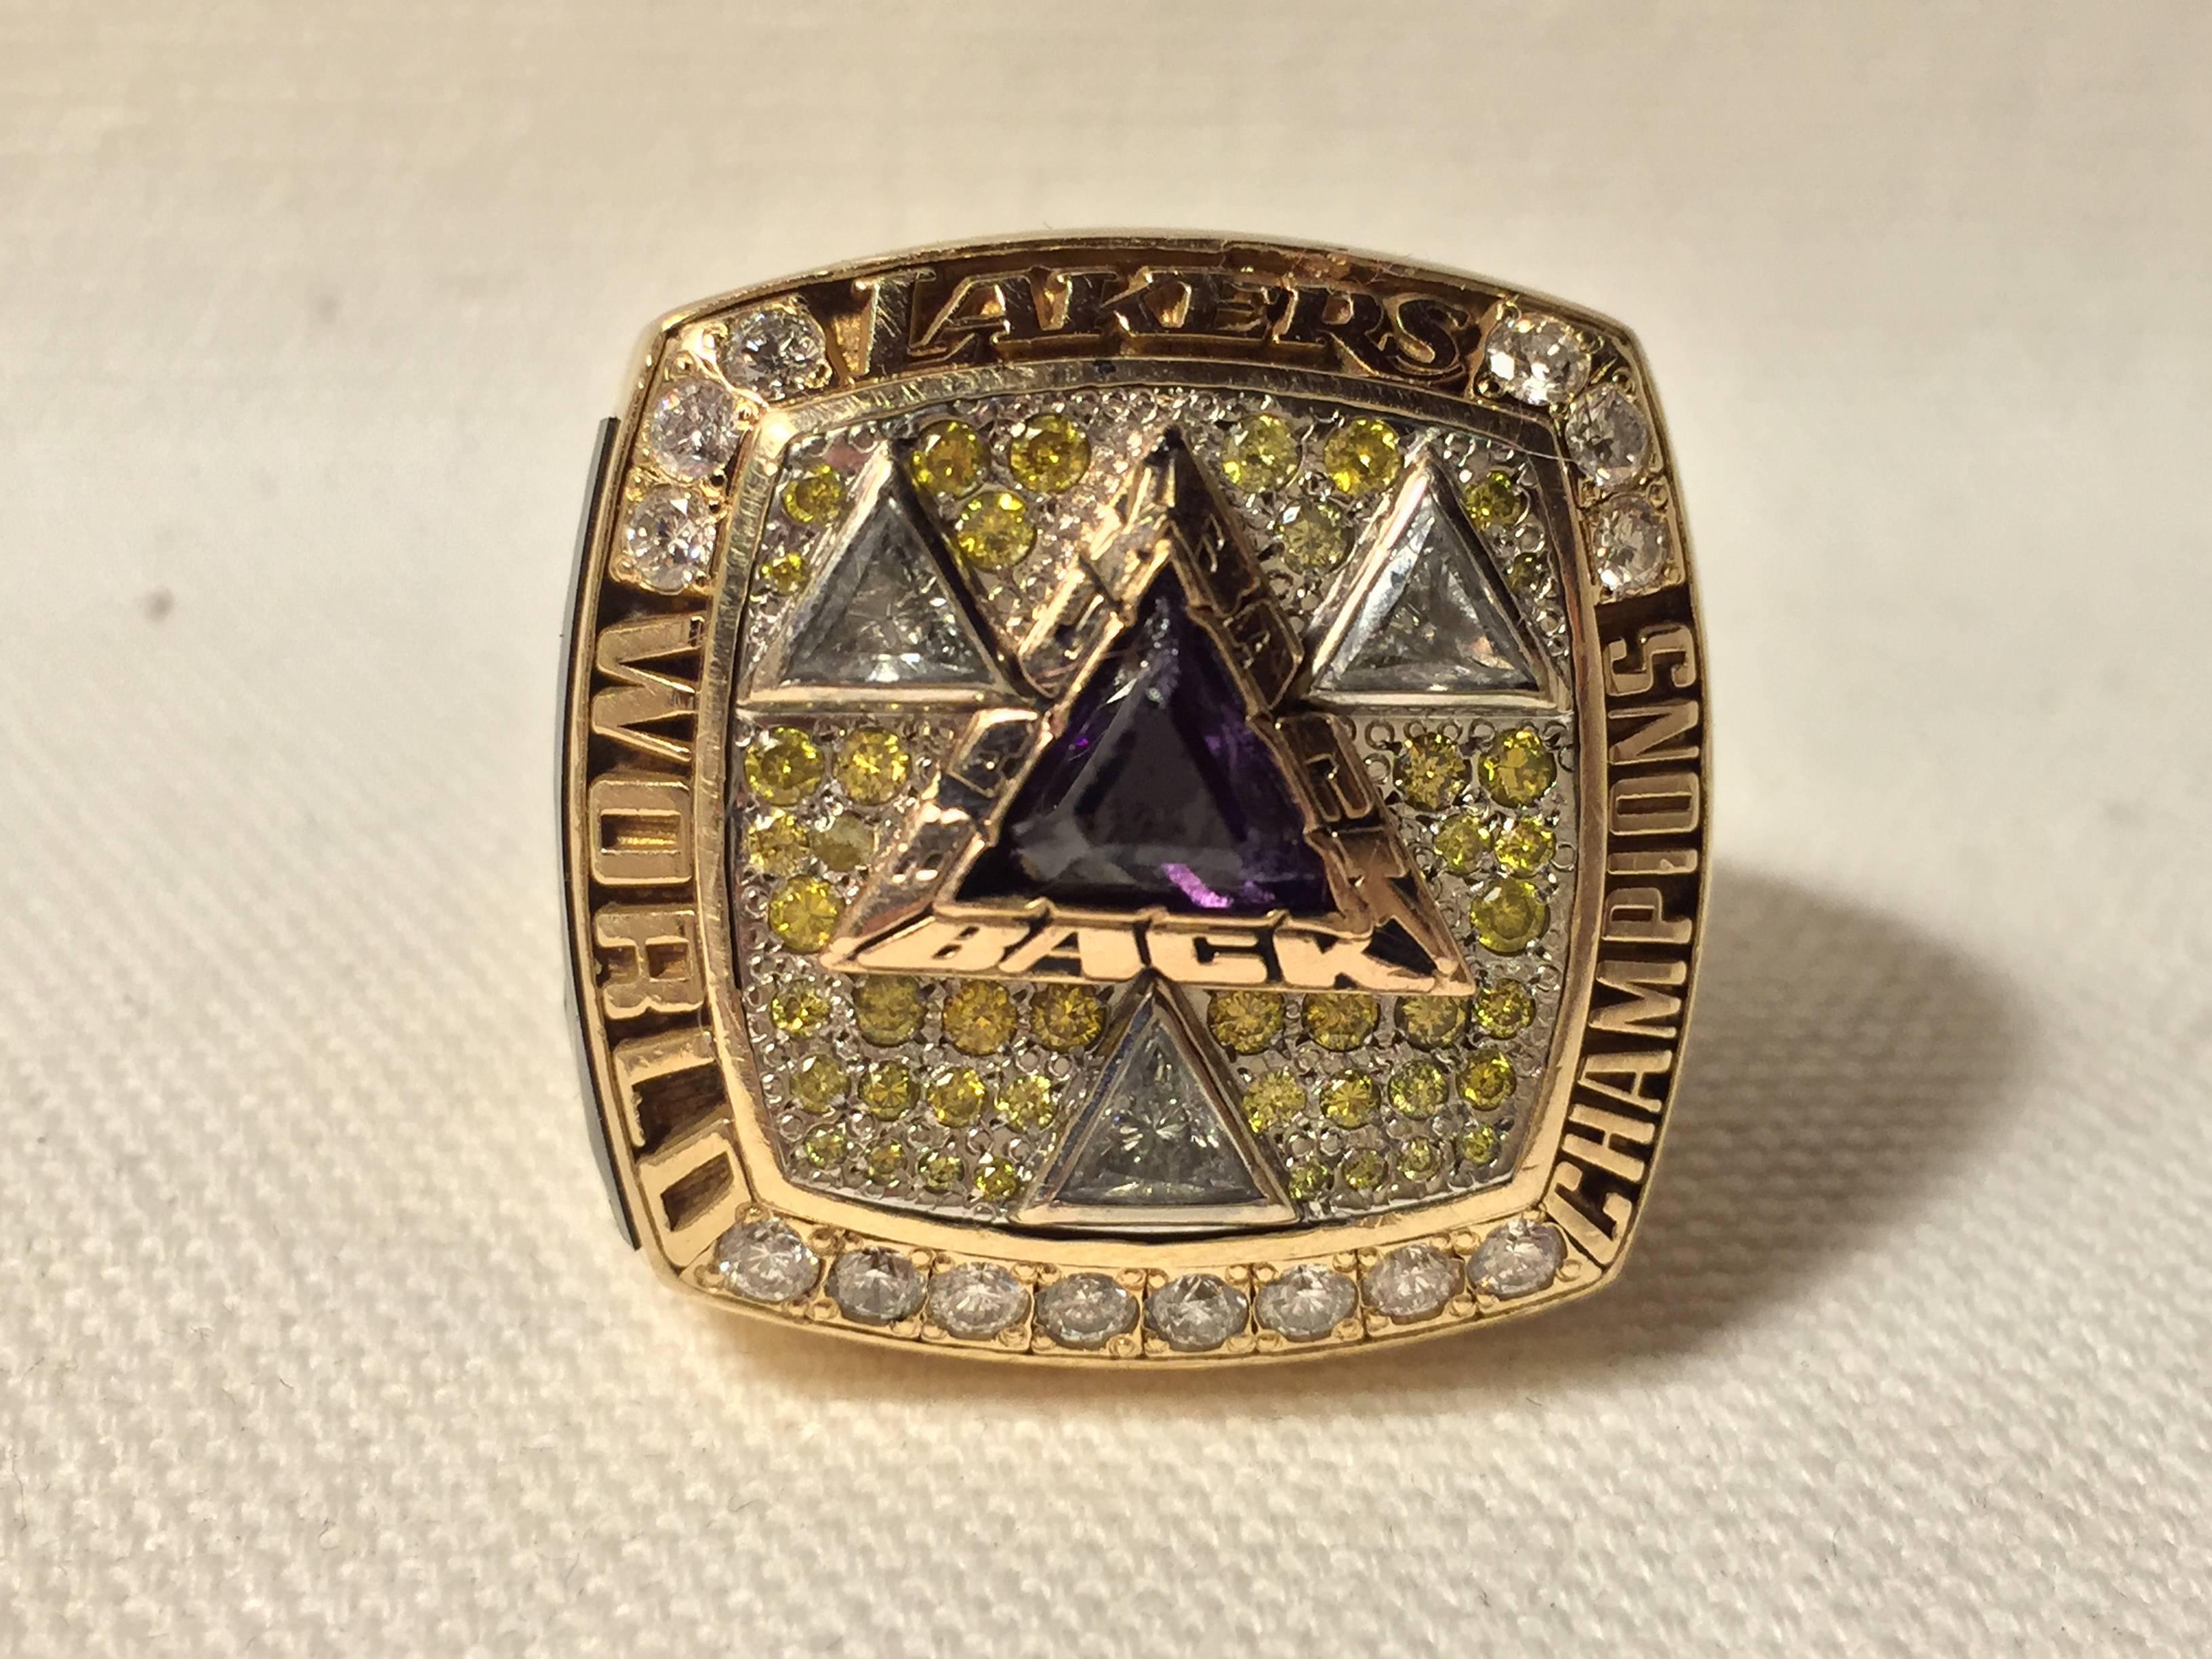 2002 Los Angeles Lakers NBA Championship ring with original presentation box. This is the same ring players received and is a full size 